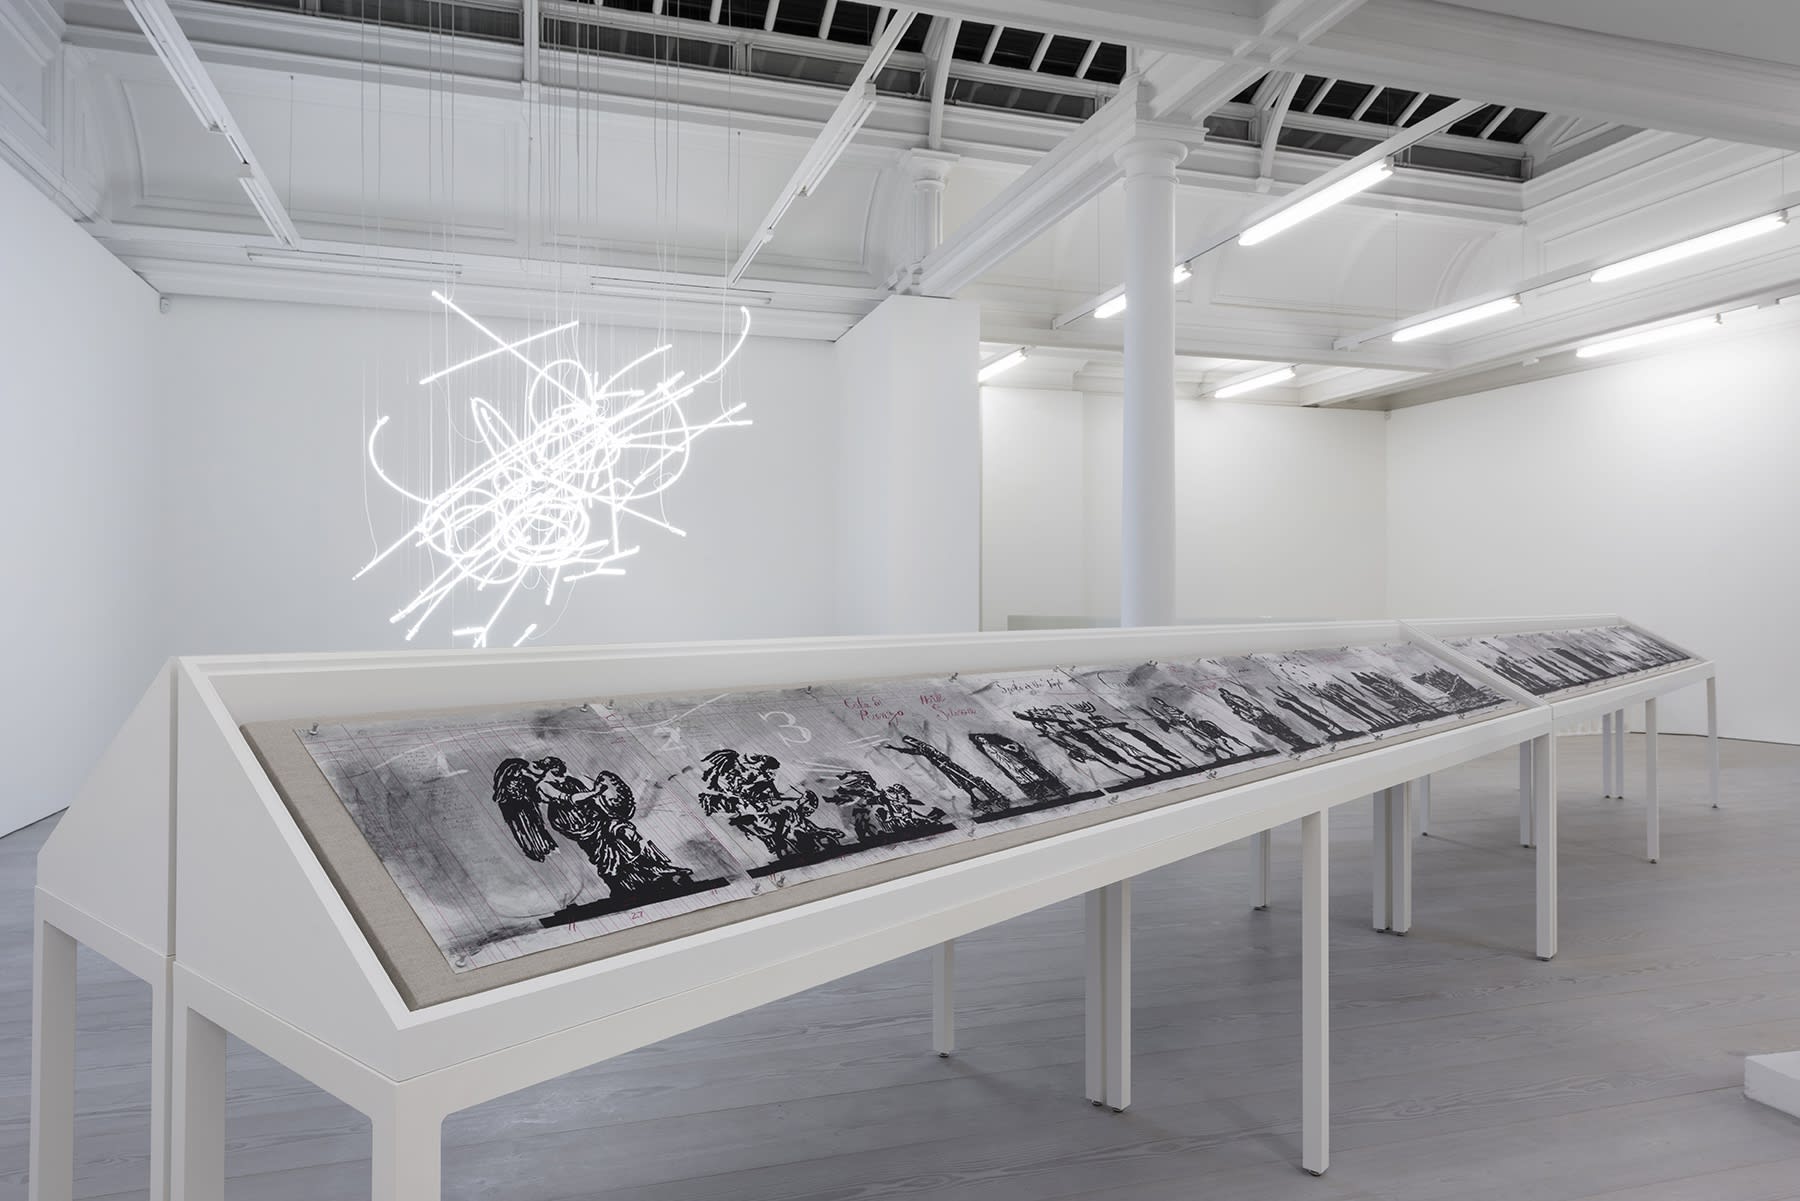 A long vitrine displaying charcoal drawings sits under a neon sculpture hanging from the ceiling.